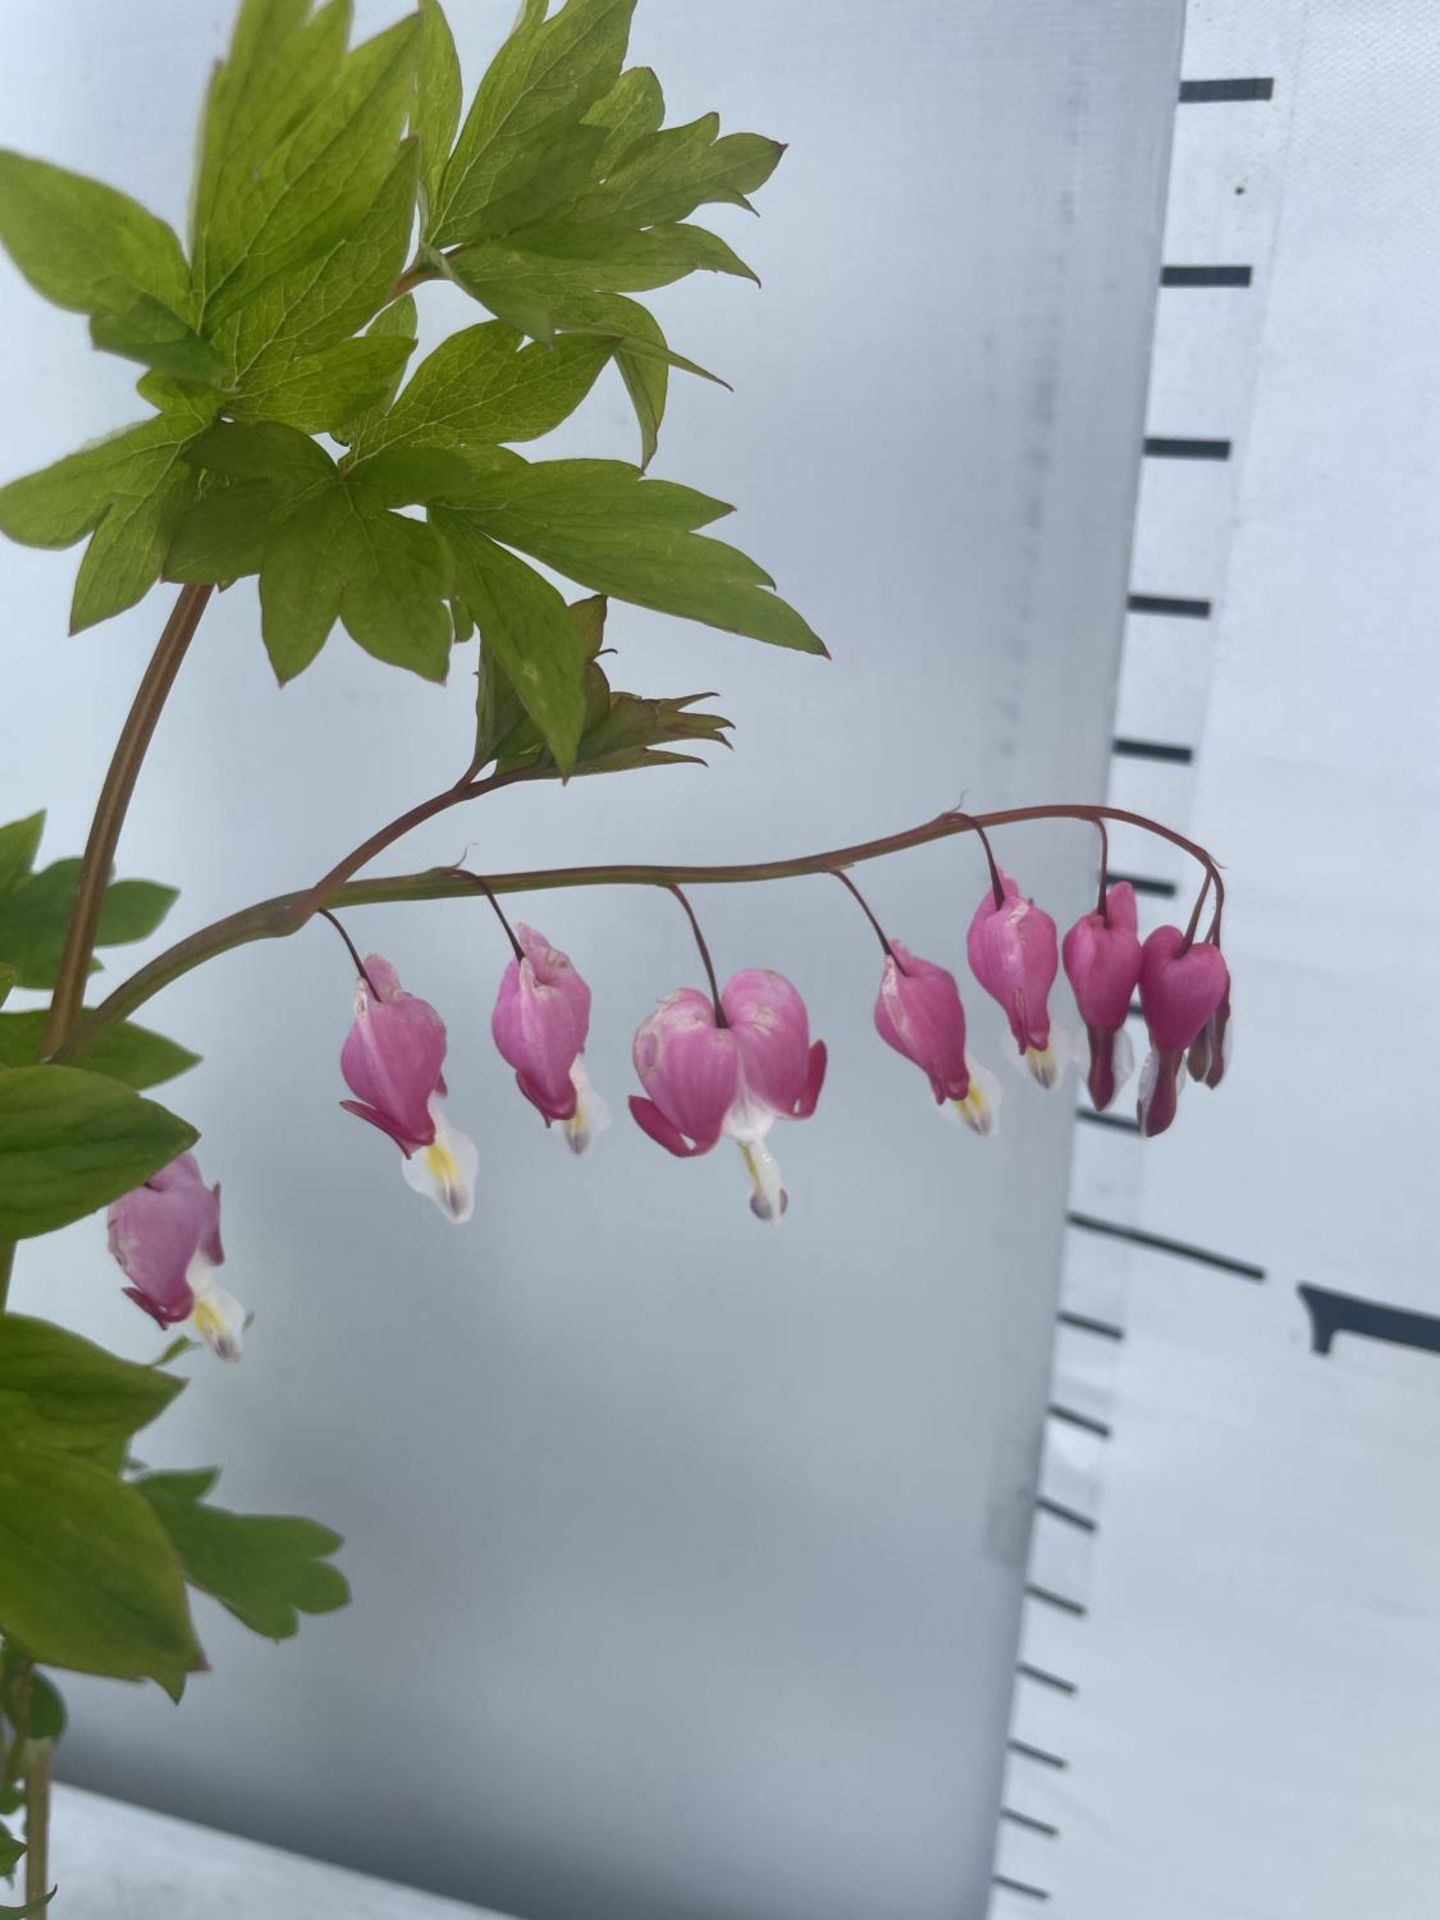 SIX DICENTRA SPECTABILIS BLEEDING HEART 50CM TALL TO BE SOLD FOR THE SIX PLUS VAT - Bild 3 aus 4